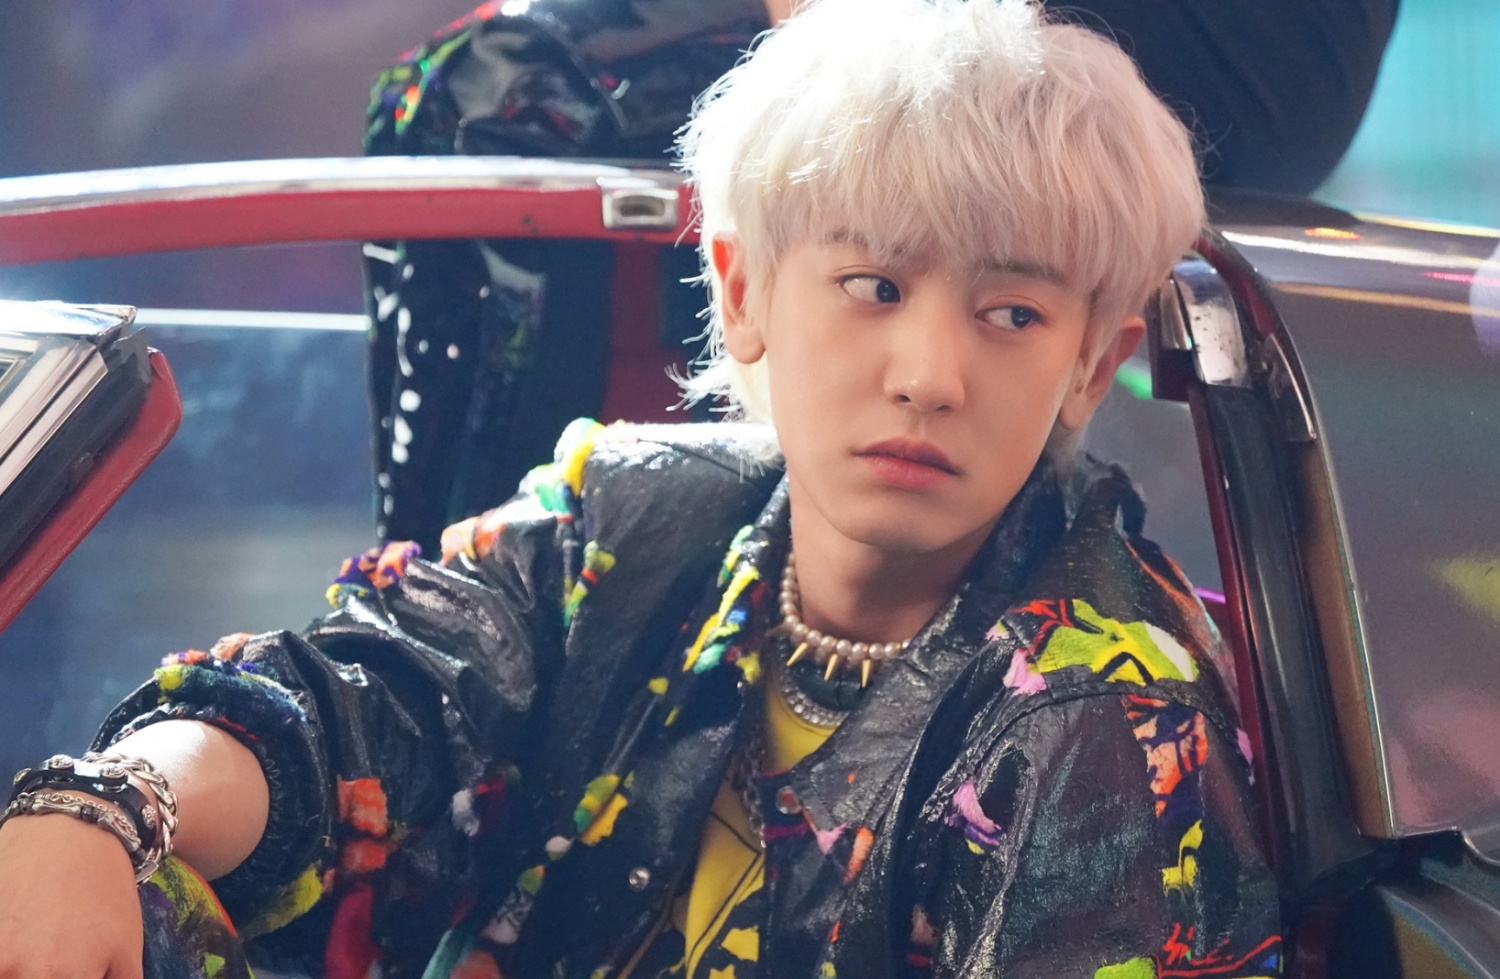 Watch: EXO's Chanyeol's Upcoming Film “The Box” Reveals New